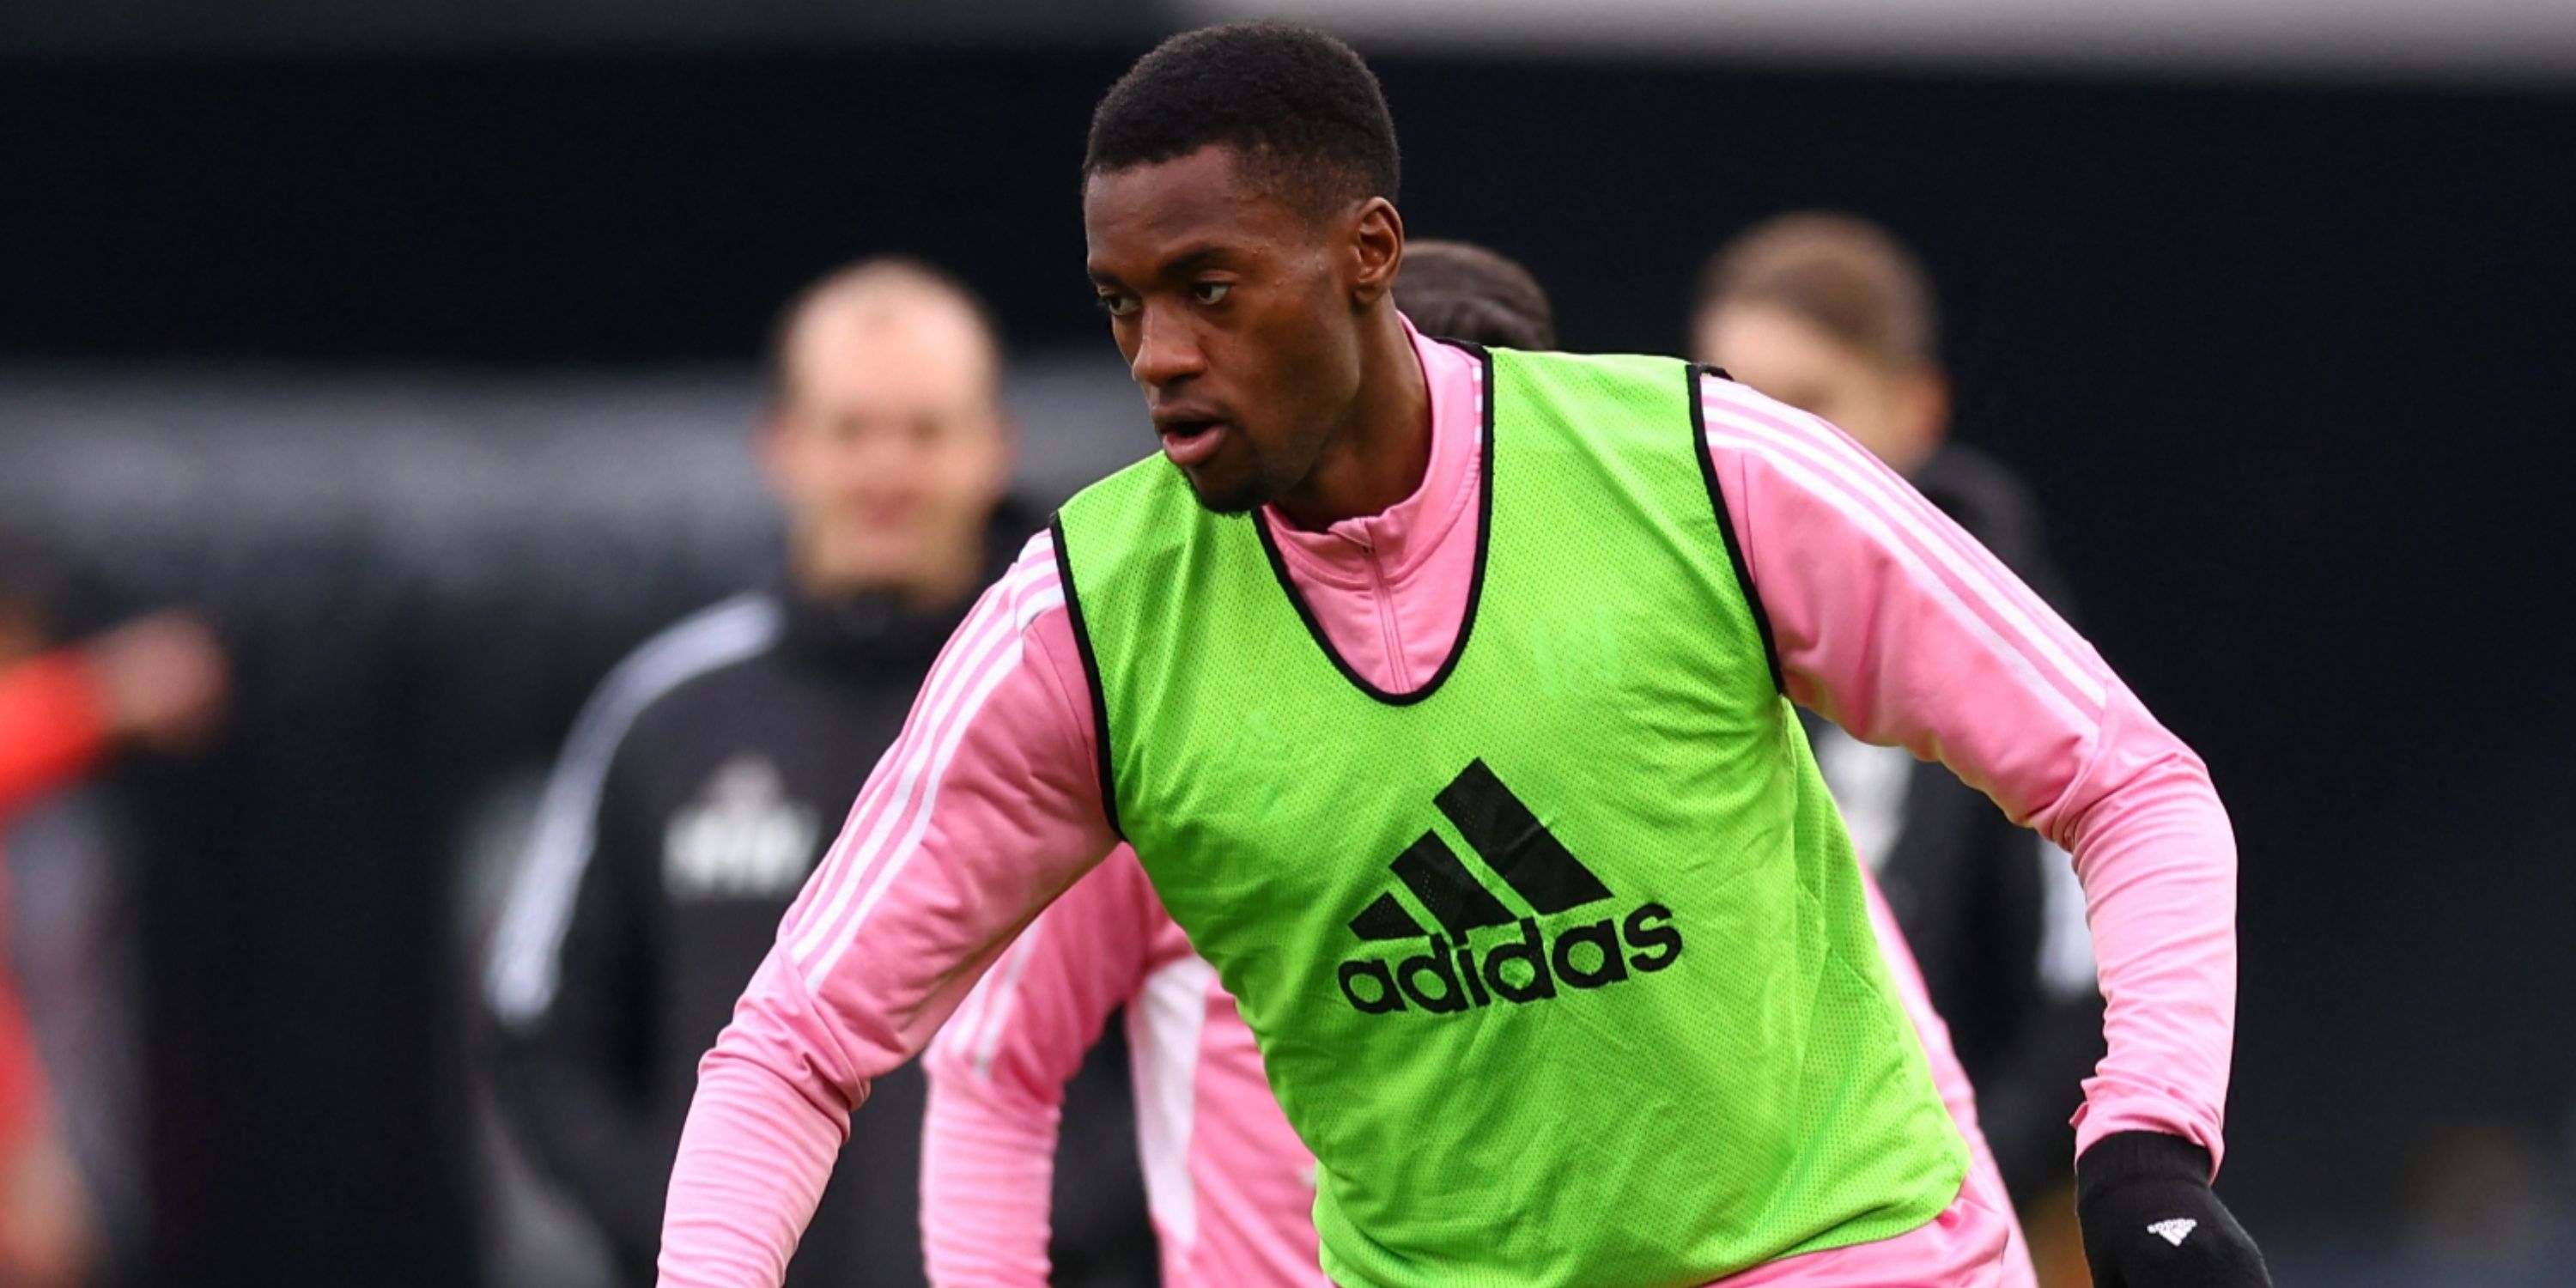 Fulham defender Tosin Adarabioyo during a pre-match warm-up